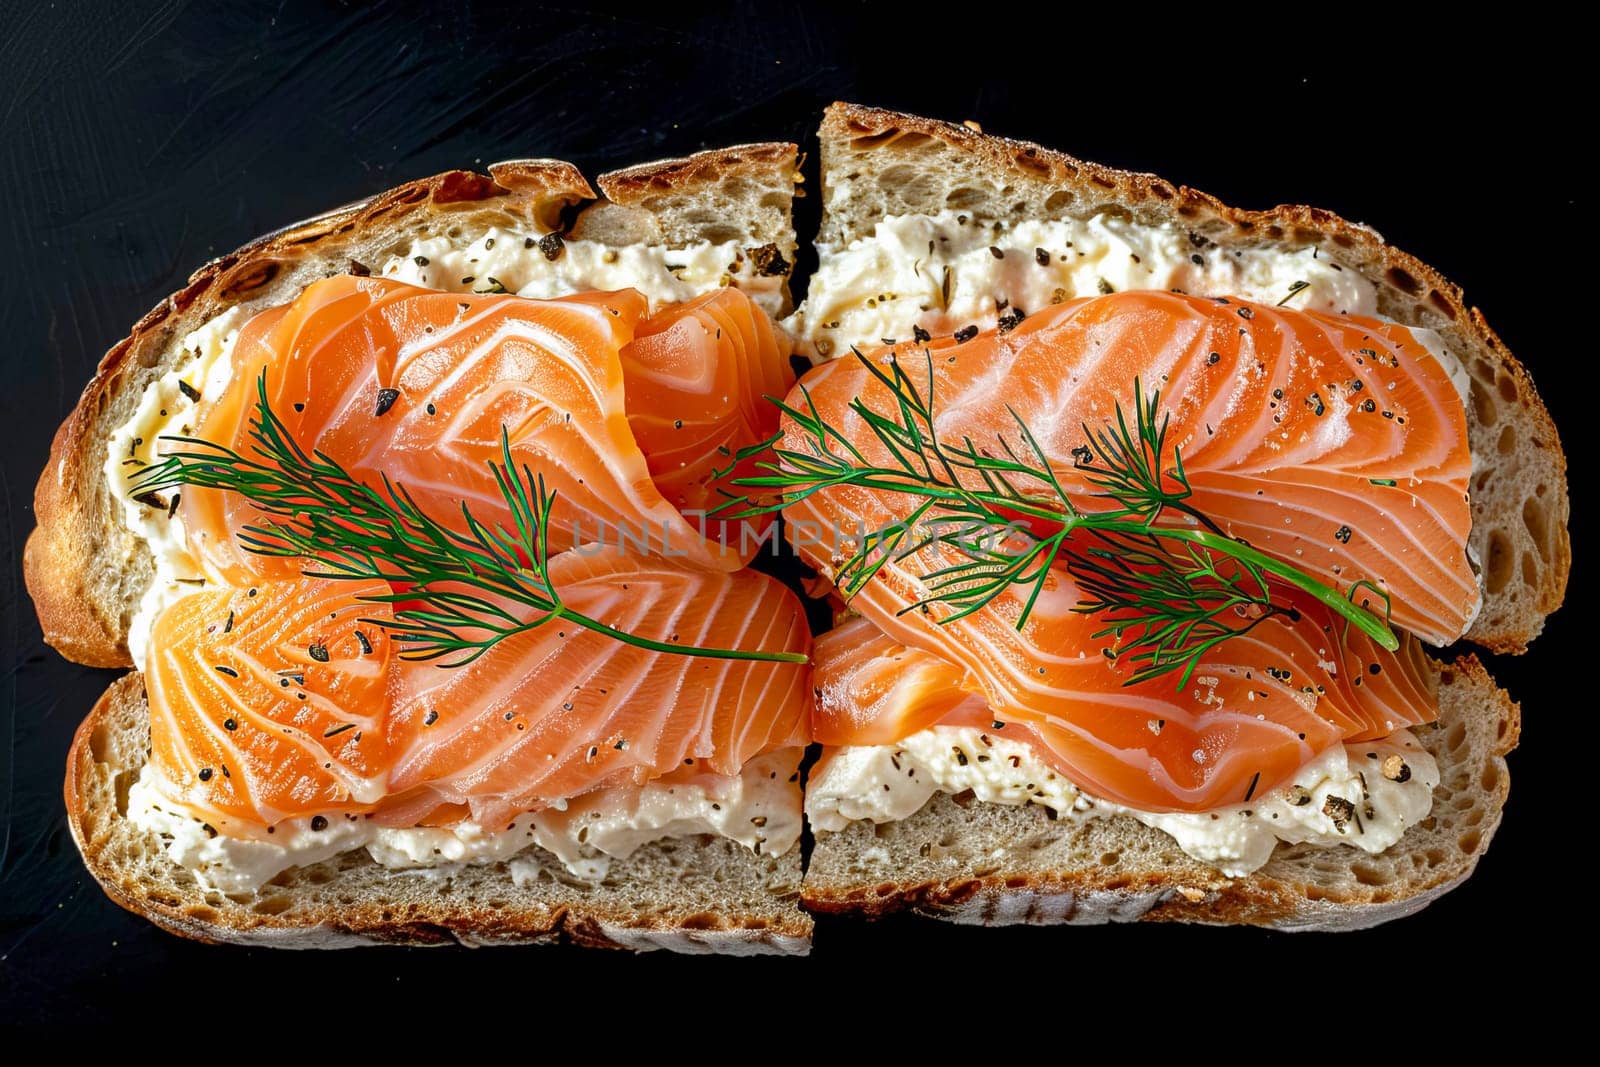 Slices of smoked salmon with cream cheese on whole grain toast, decorated with sprigs of dill, top view, on a black background. AI generated.